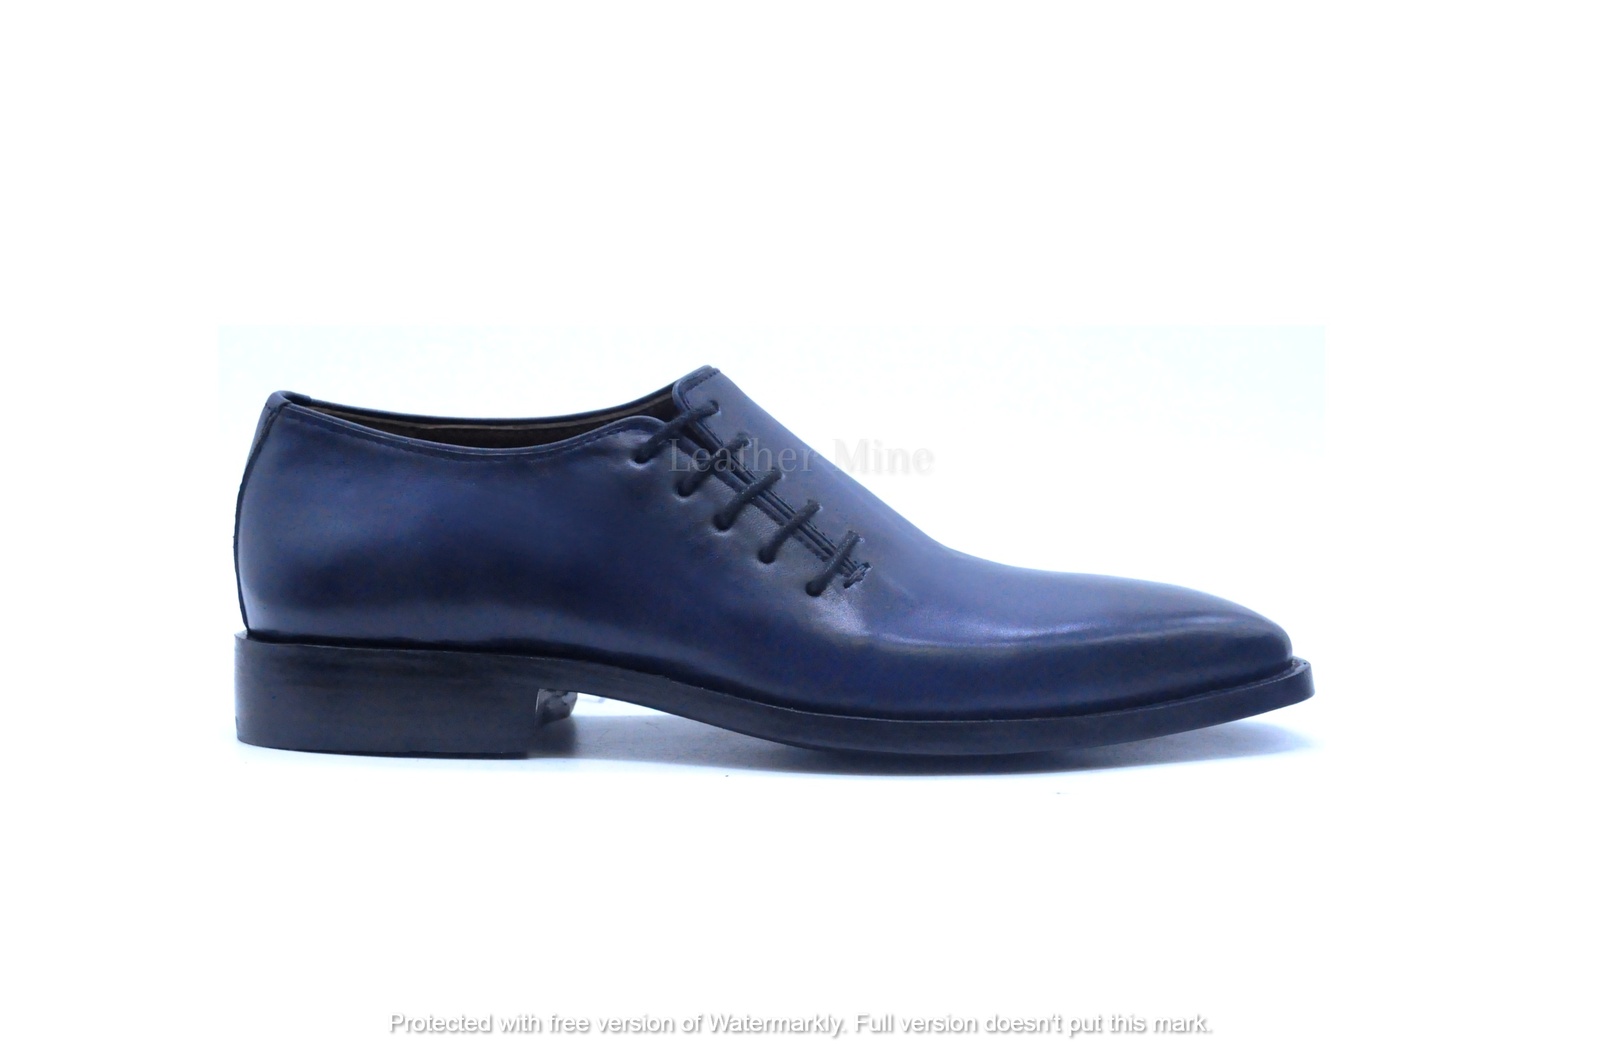 Handmade Blue Patina Whole Cut Oxfords Dress Genuine Leather Formal Shoes